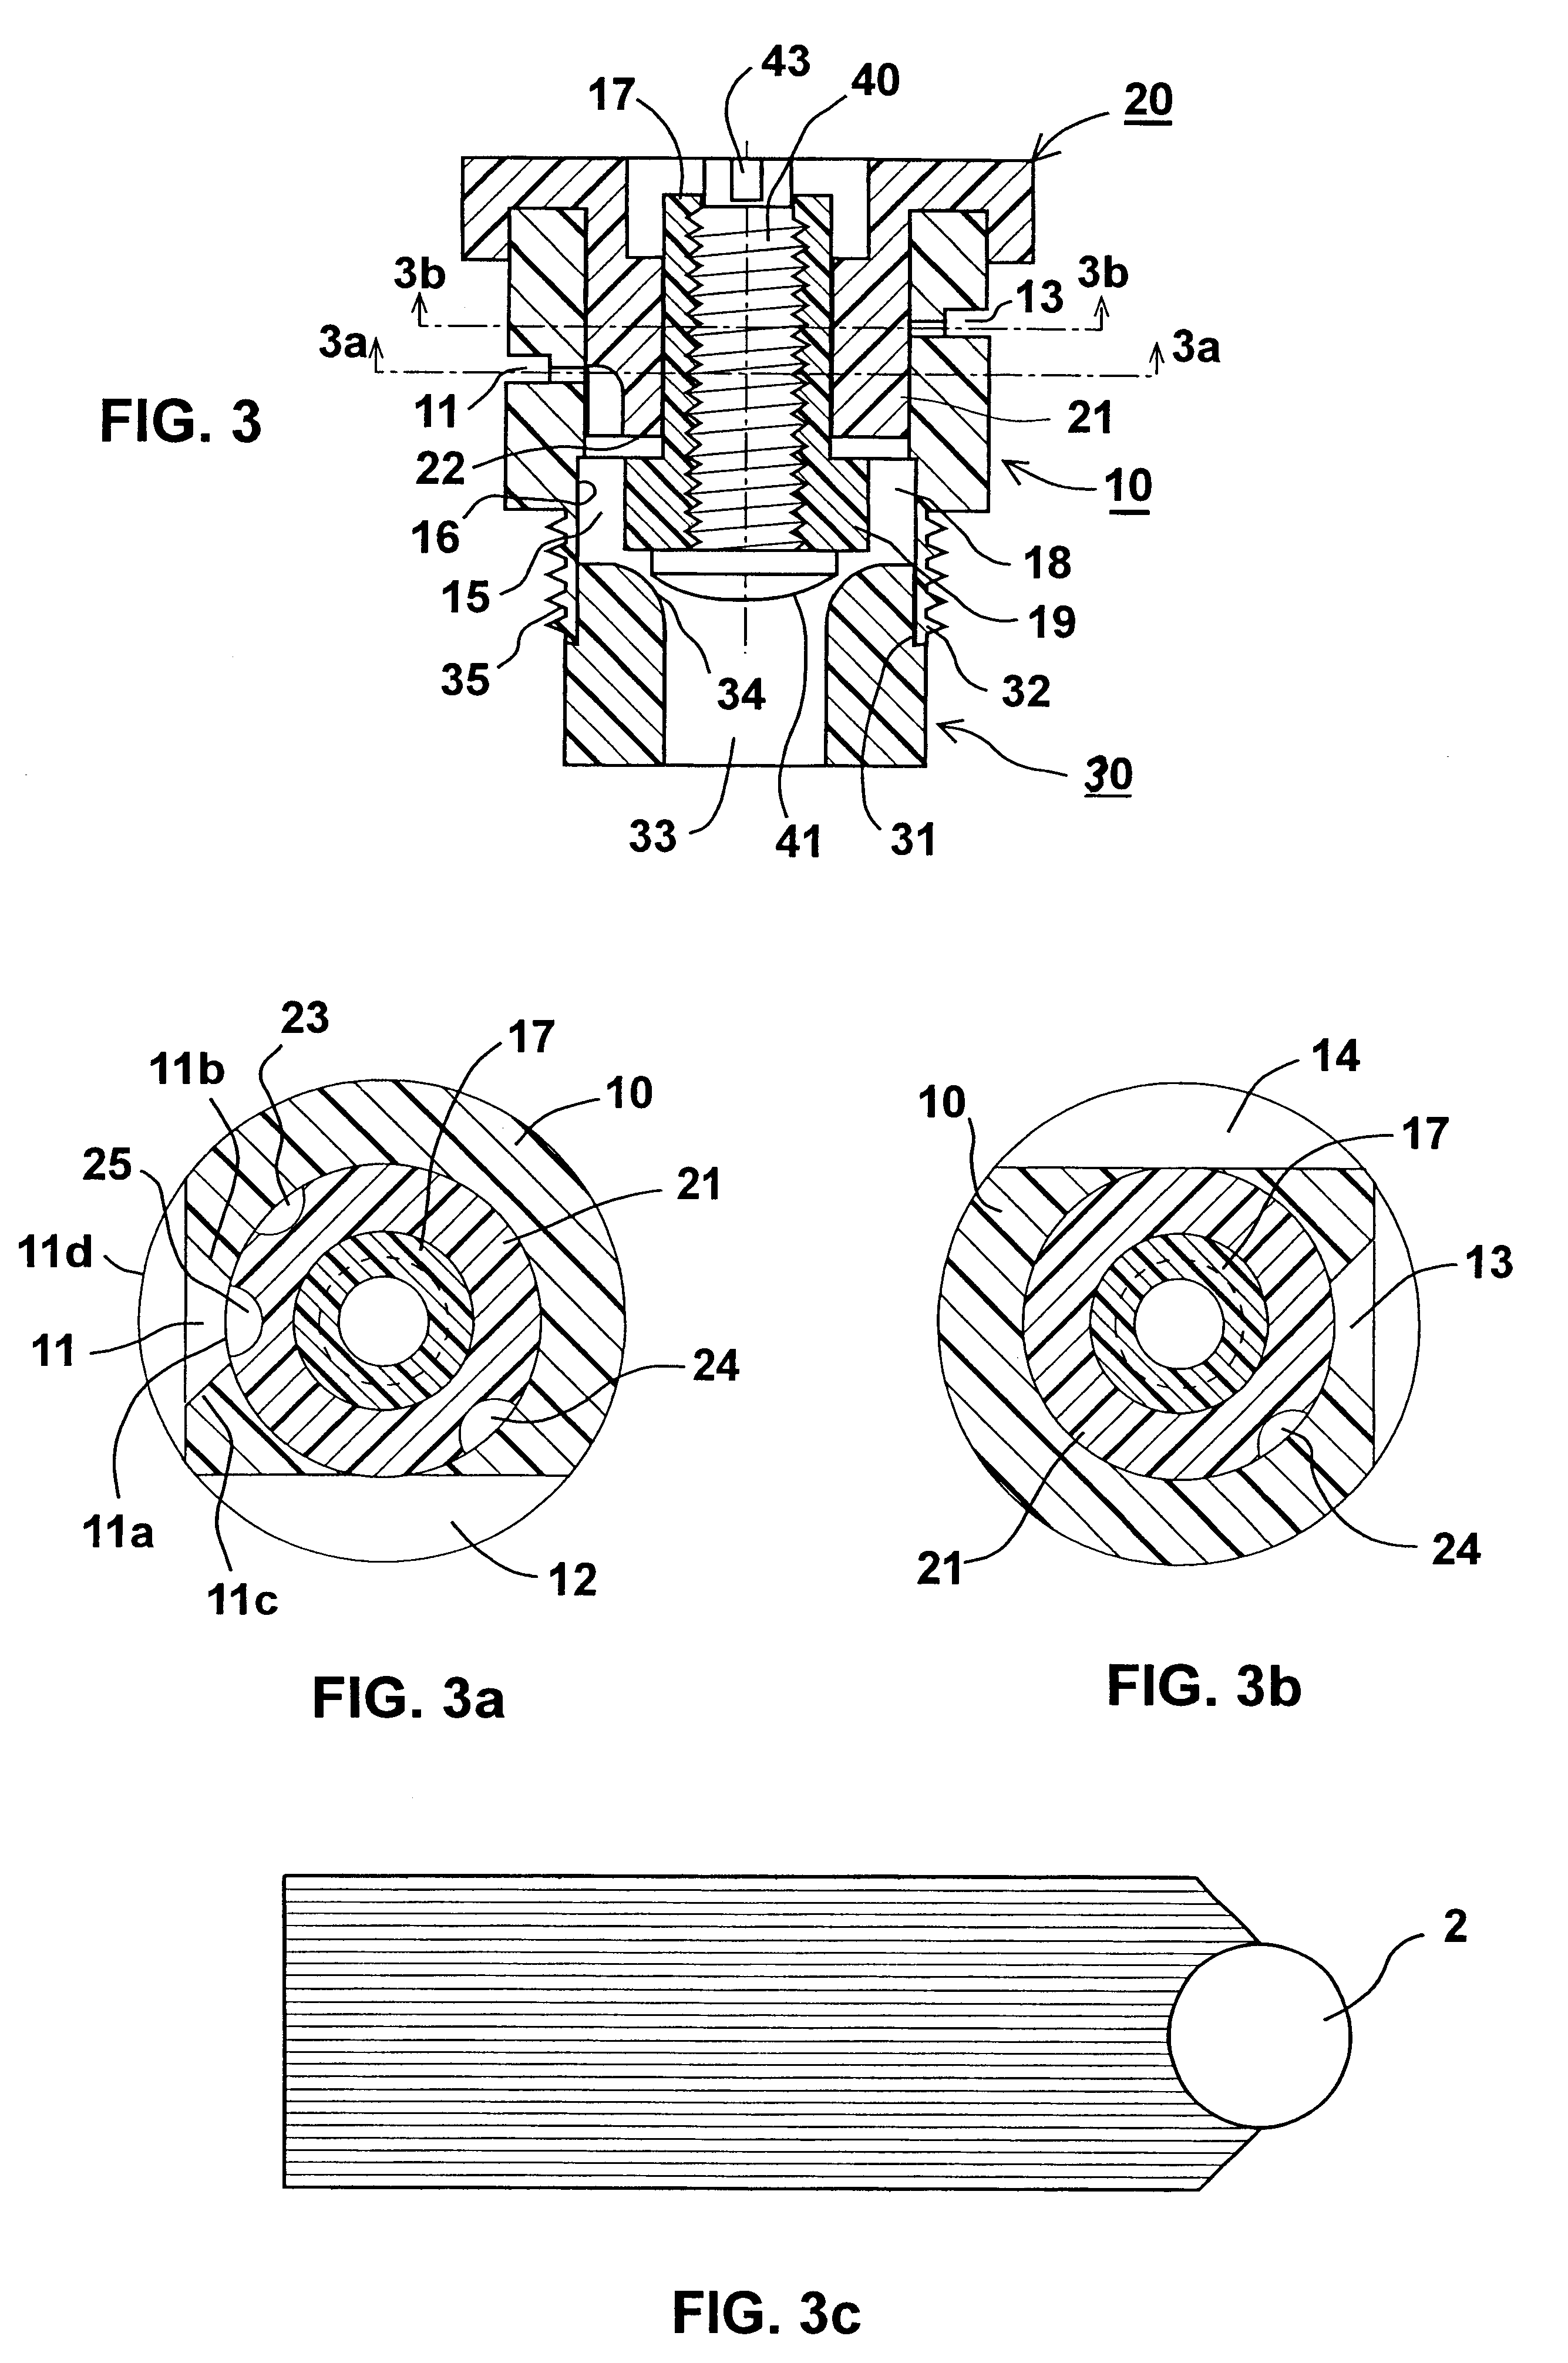 Static sprinkler with presettable water discharge pattern